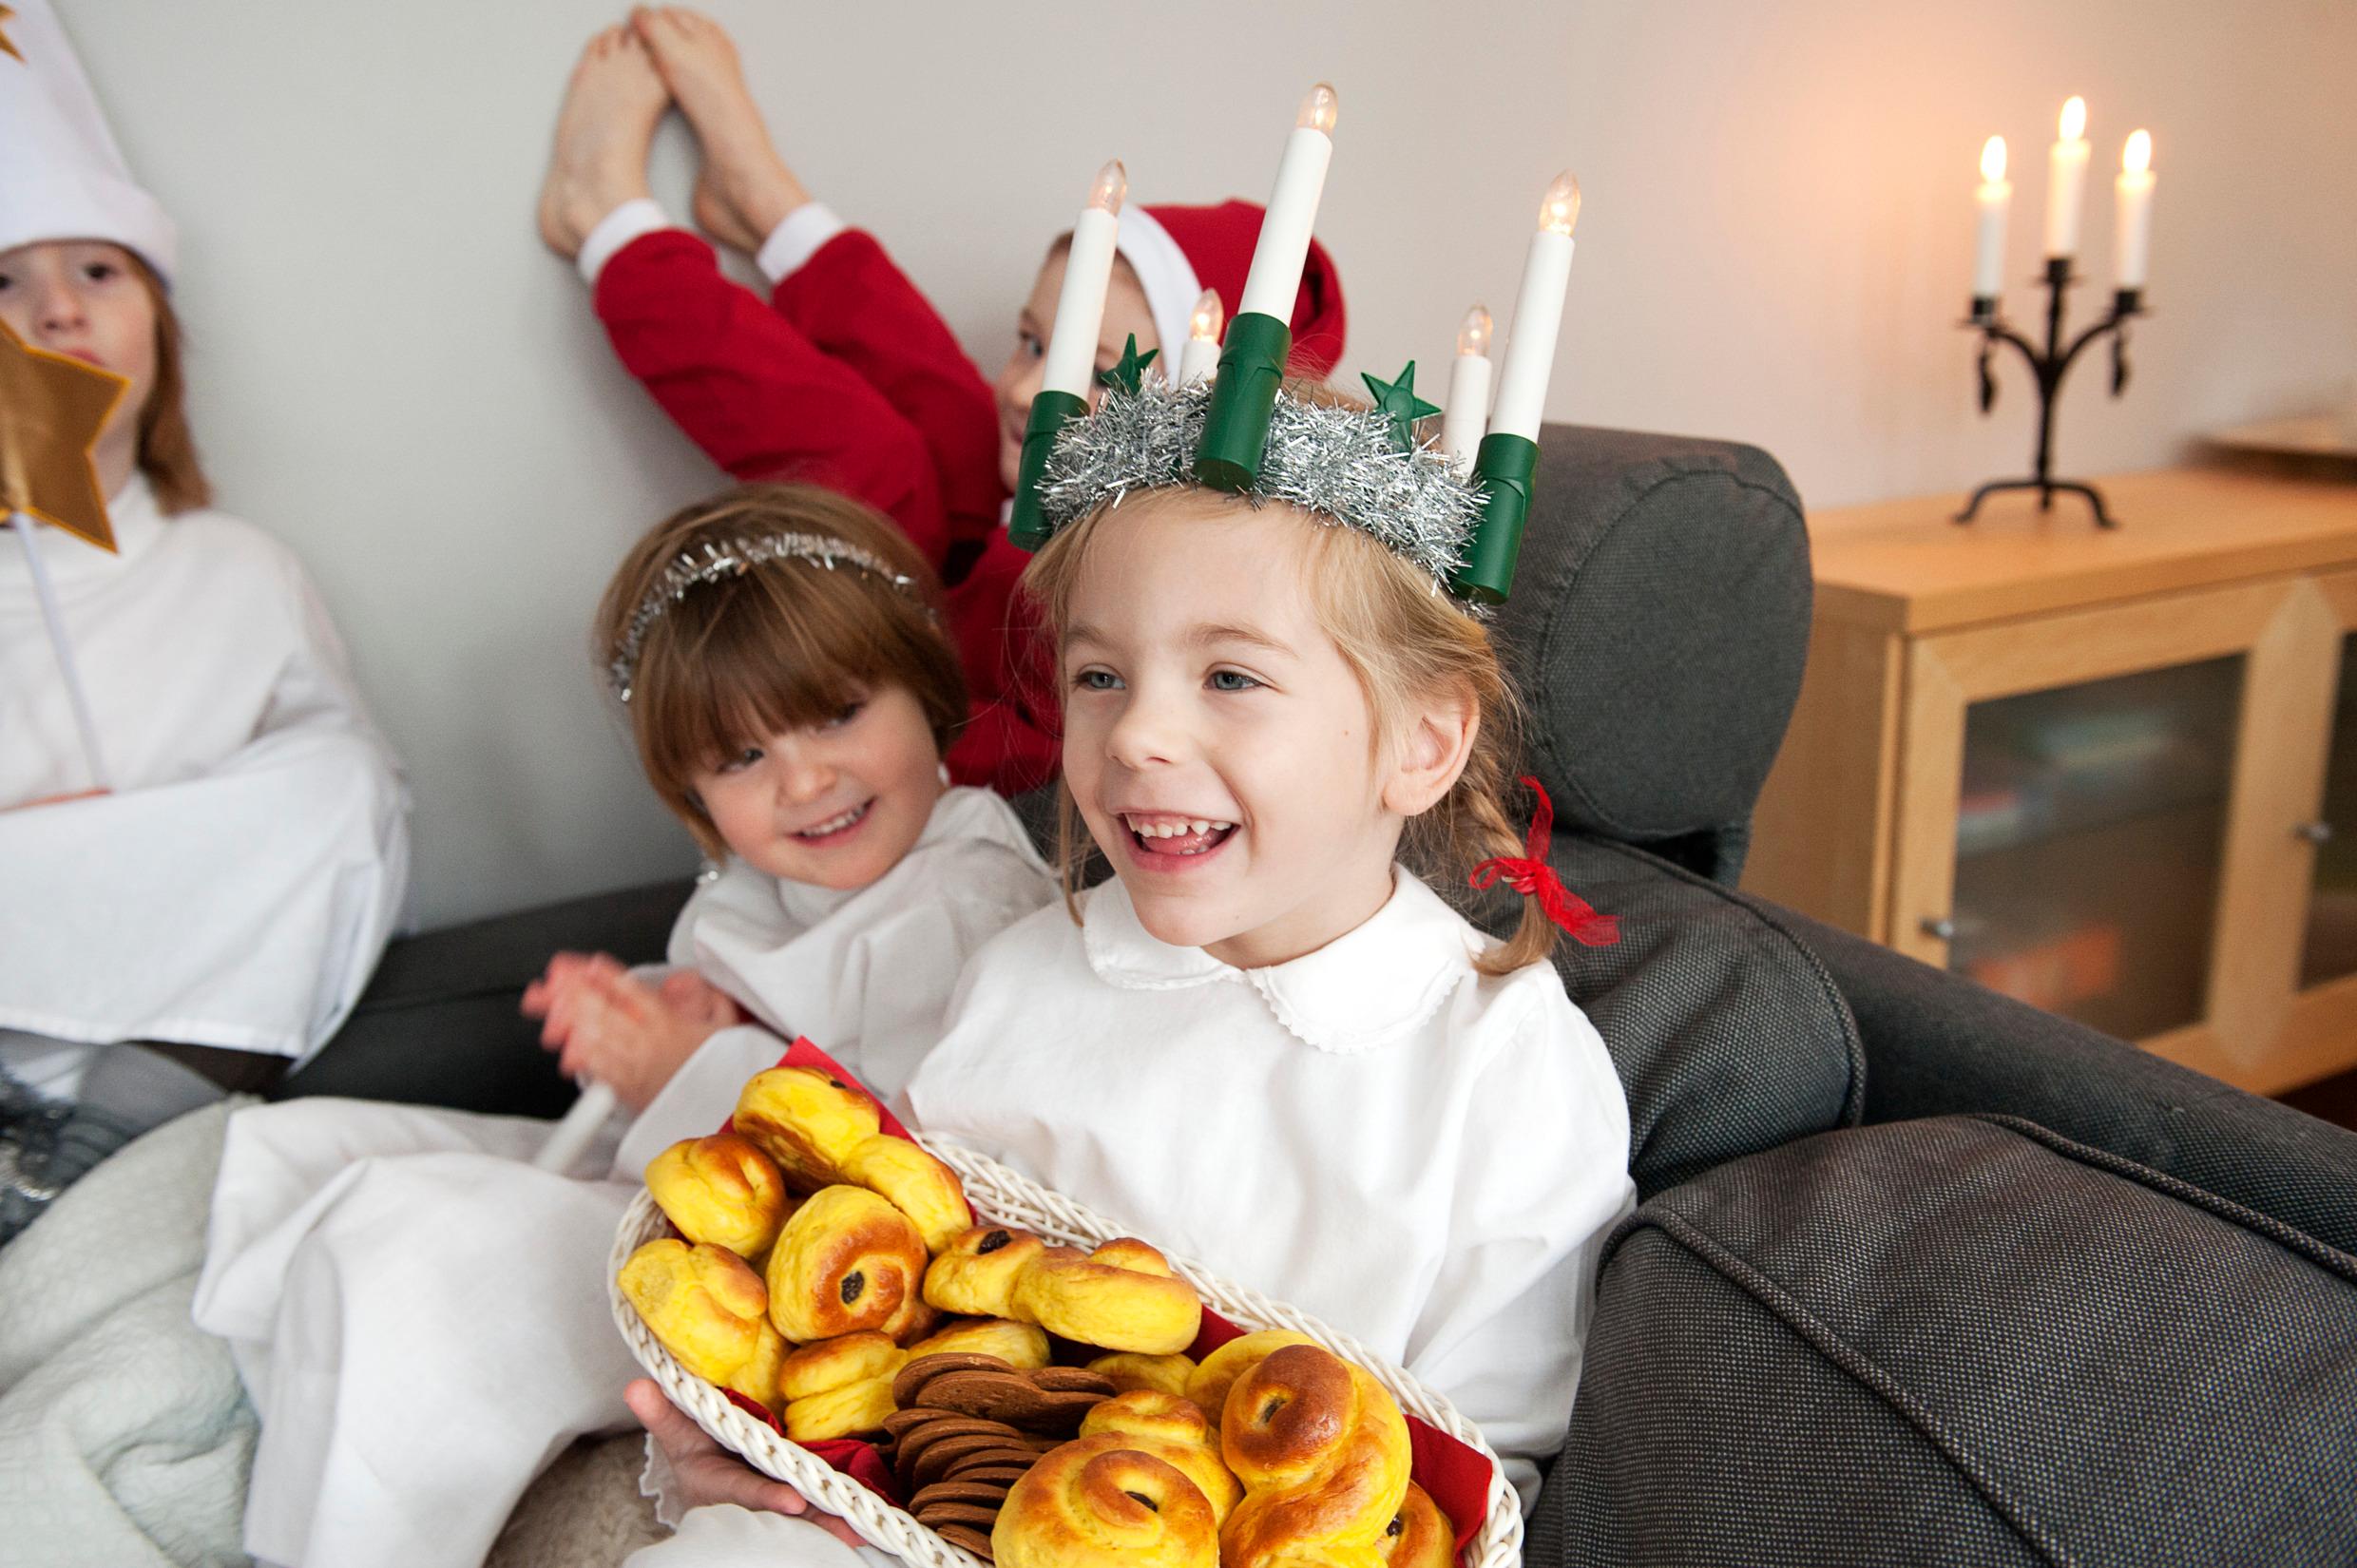 Four children dressed for Lucia celebrations - in white gowns, and one in a Santa outfit. One girl is holding a basket full of yellow buns and gingerbread biscuits.